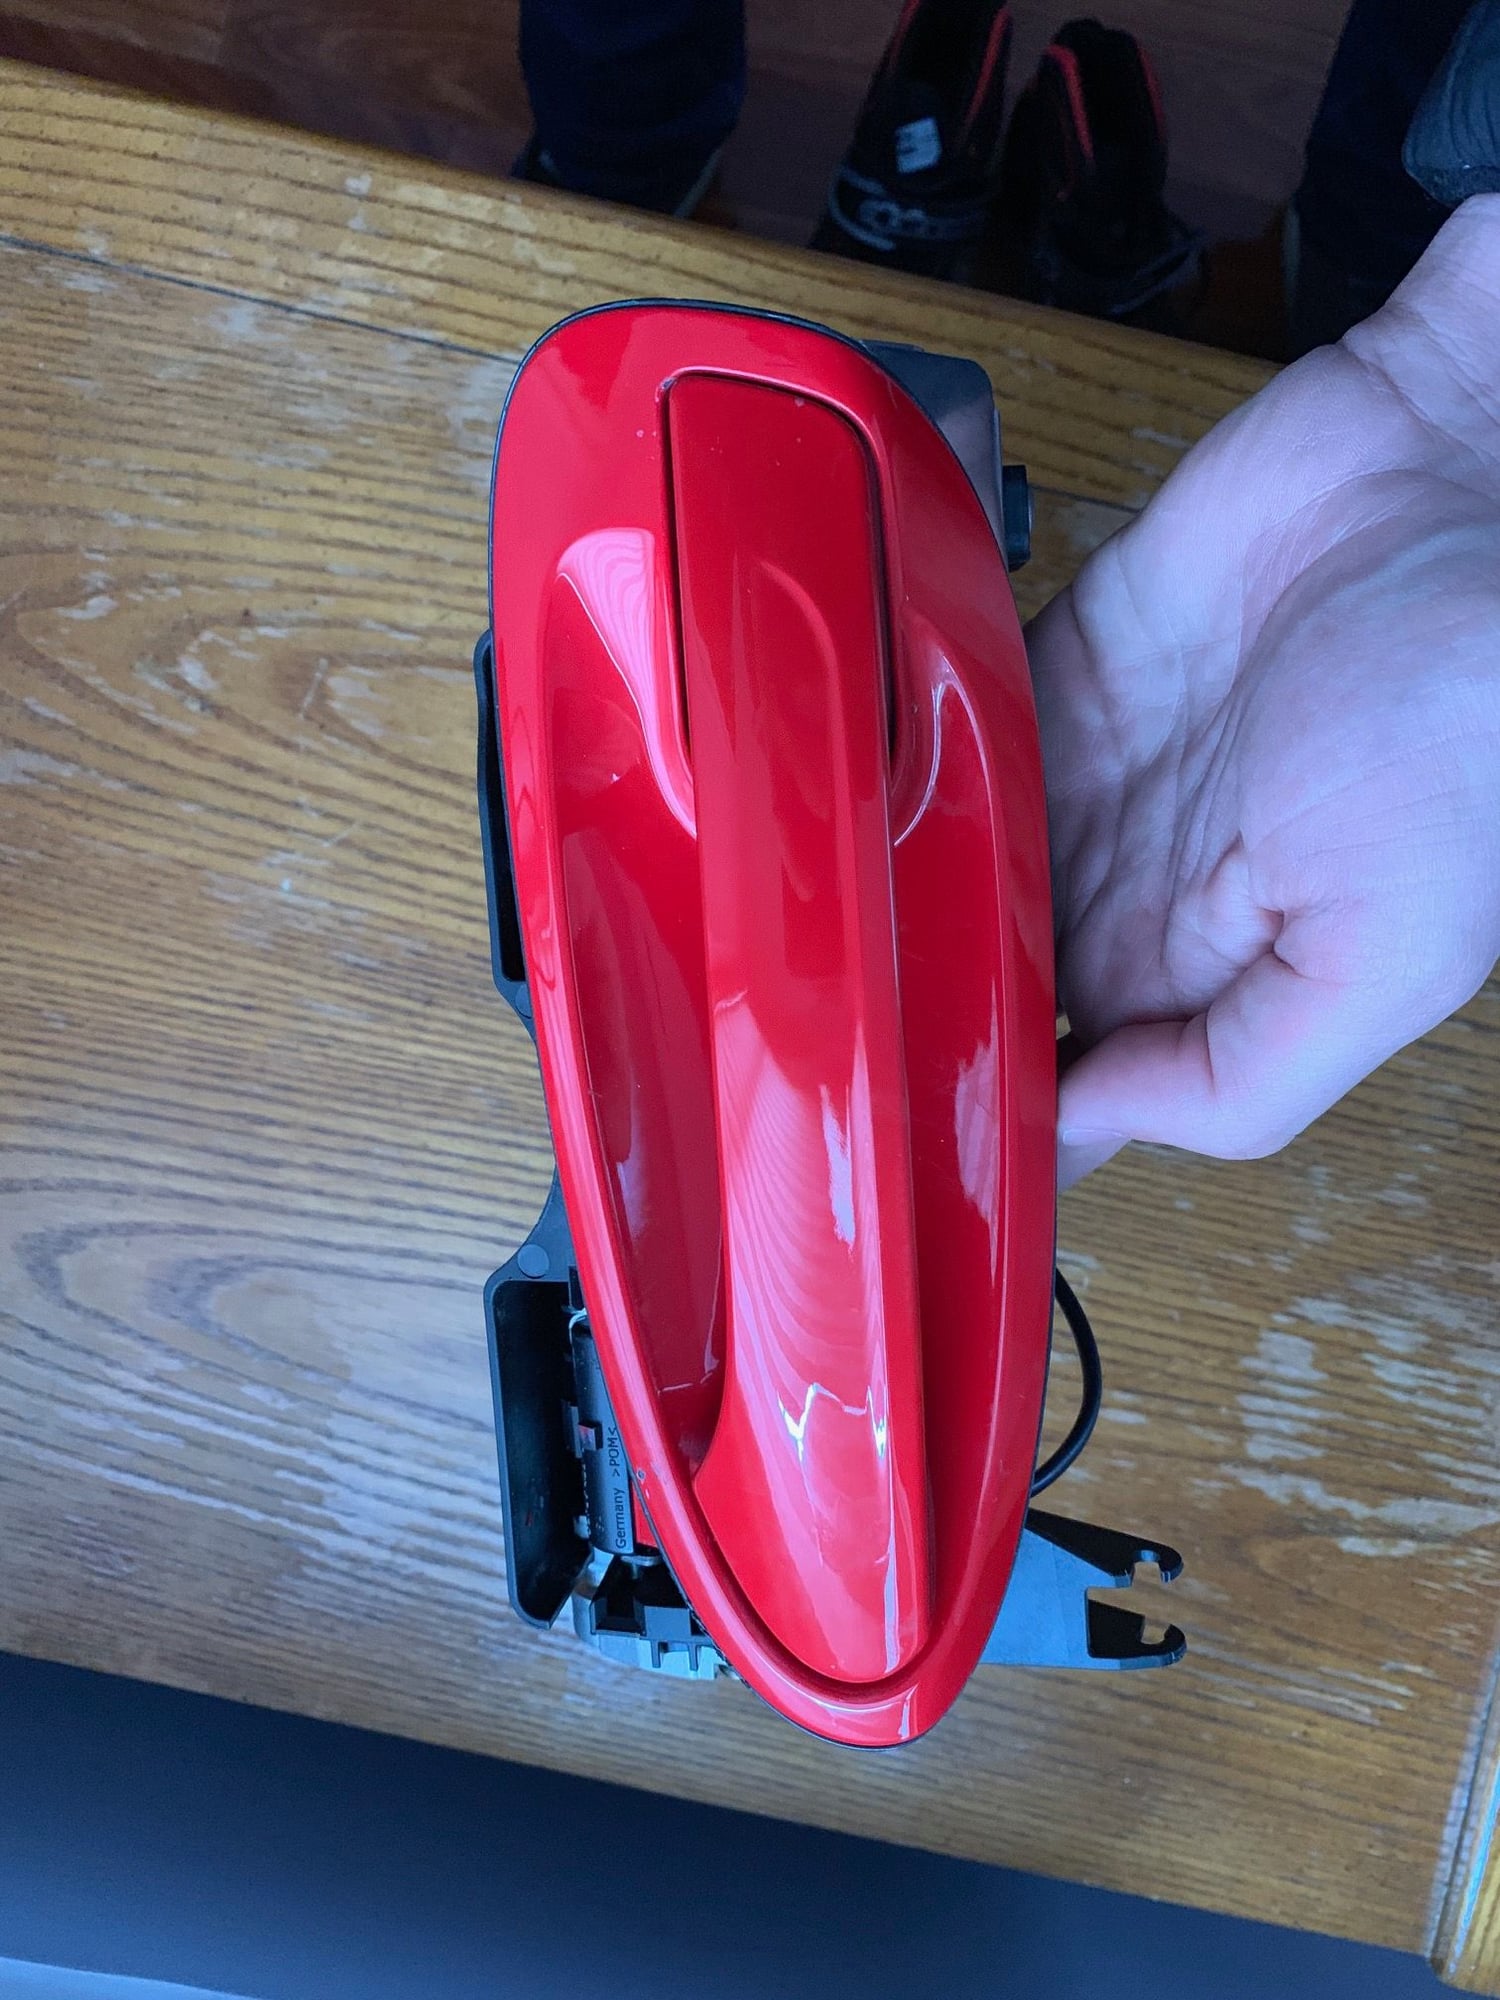 Exterior Body Parts - 981 Cayman/Boxster Driverside Door Handle (Guards Red) - Used - 2013 to 2016 Porsche Cayman - New York, NY 11106, United States